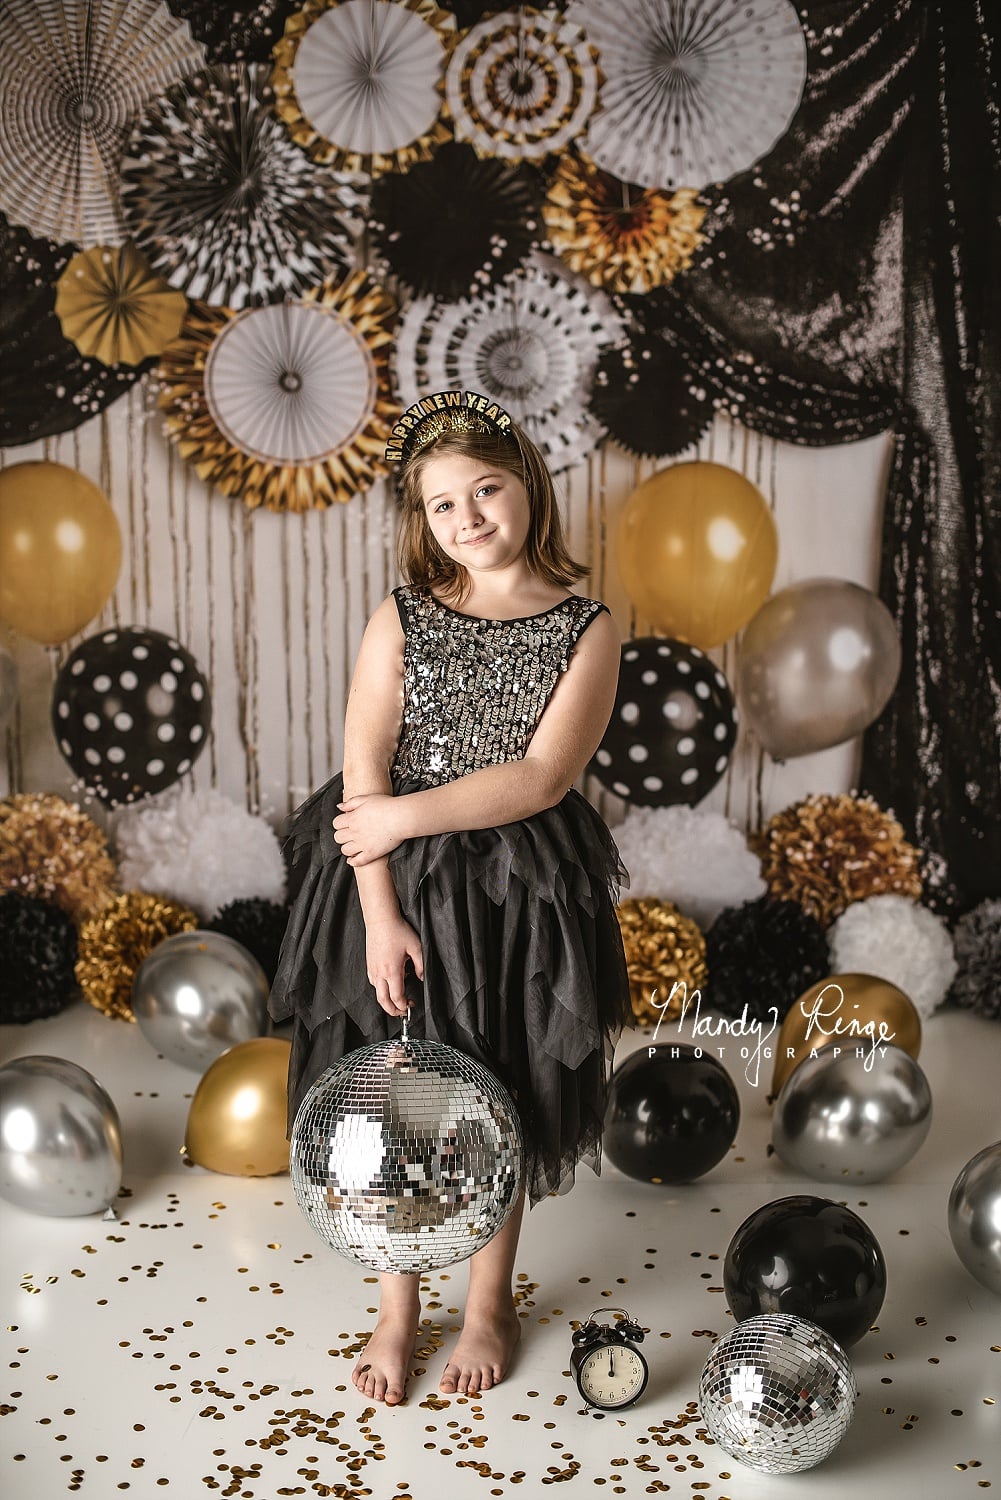 Kate Black and Gold New Year Eve Party Backdrop Designed By Mandy Ringe Photography